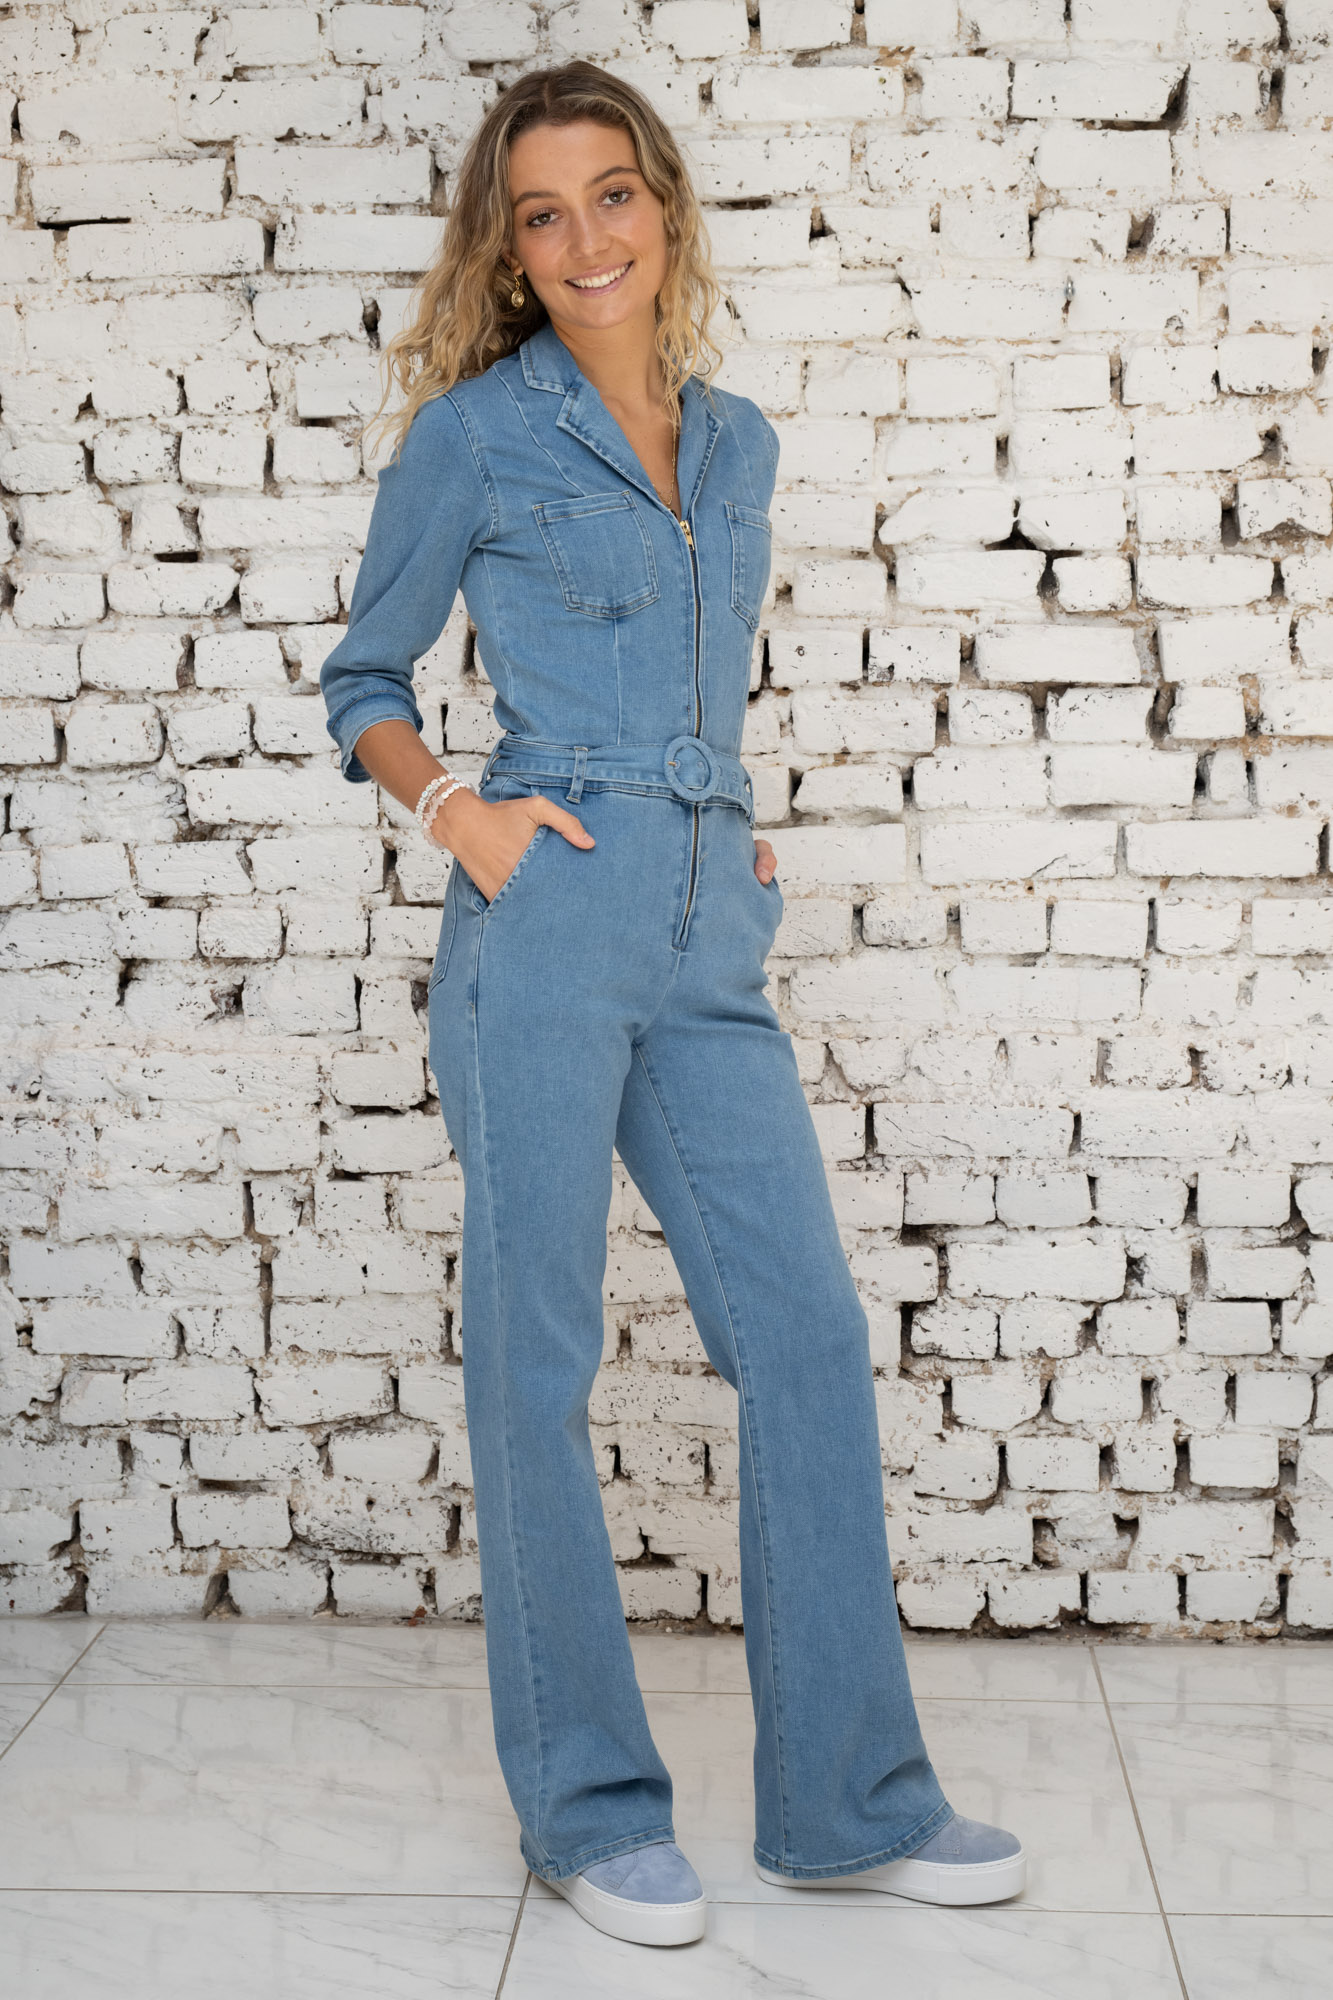 A radiant woman stands confidently against a textured white brick wall, wearing the White Coco Brooke Jumpsuit in a classic denim wash. The jumpsuit's flattering fit is accentuated by its cinched waist and flared legs, paired with casual white sneakers, embodying a relaxed yet chic aesthetic.